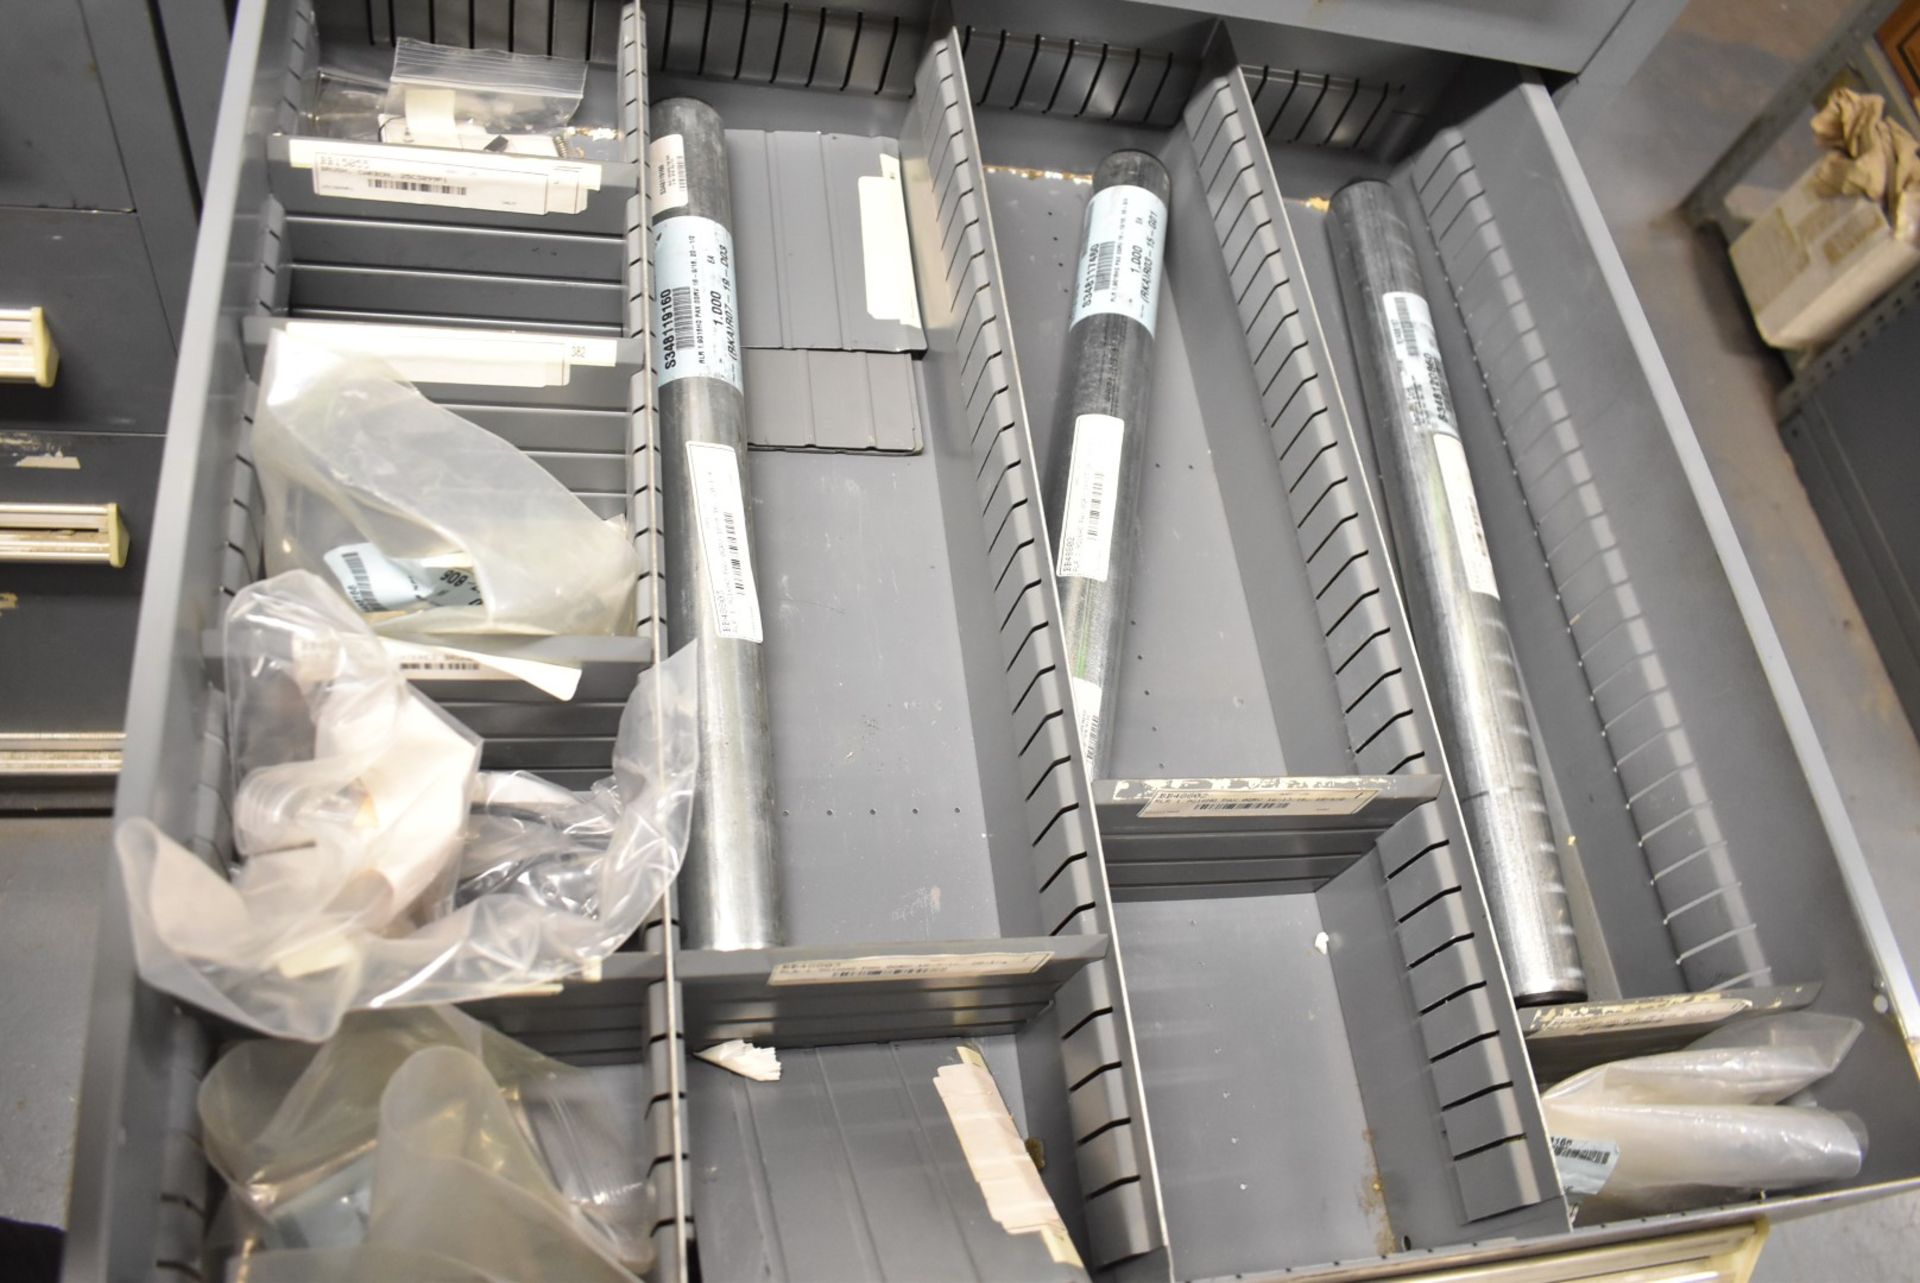 LOT/ REMAINING CONTENTS OF CABINET - SR-4 WRAPPER SPARE PARTS & COMPONENTS (TOOL CABINET NOT - Image 5 of 7